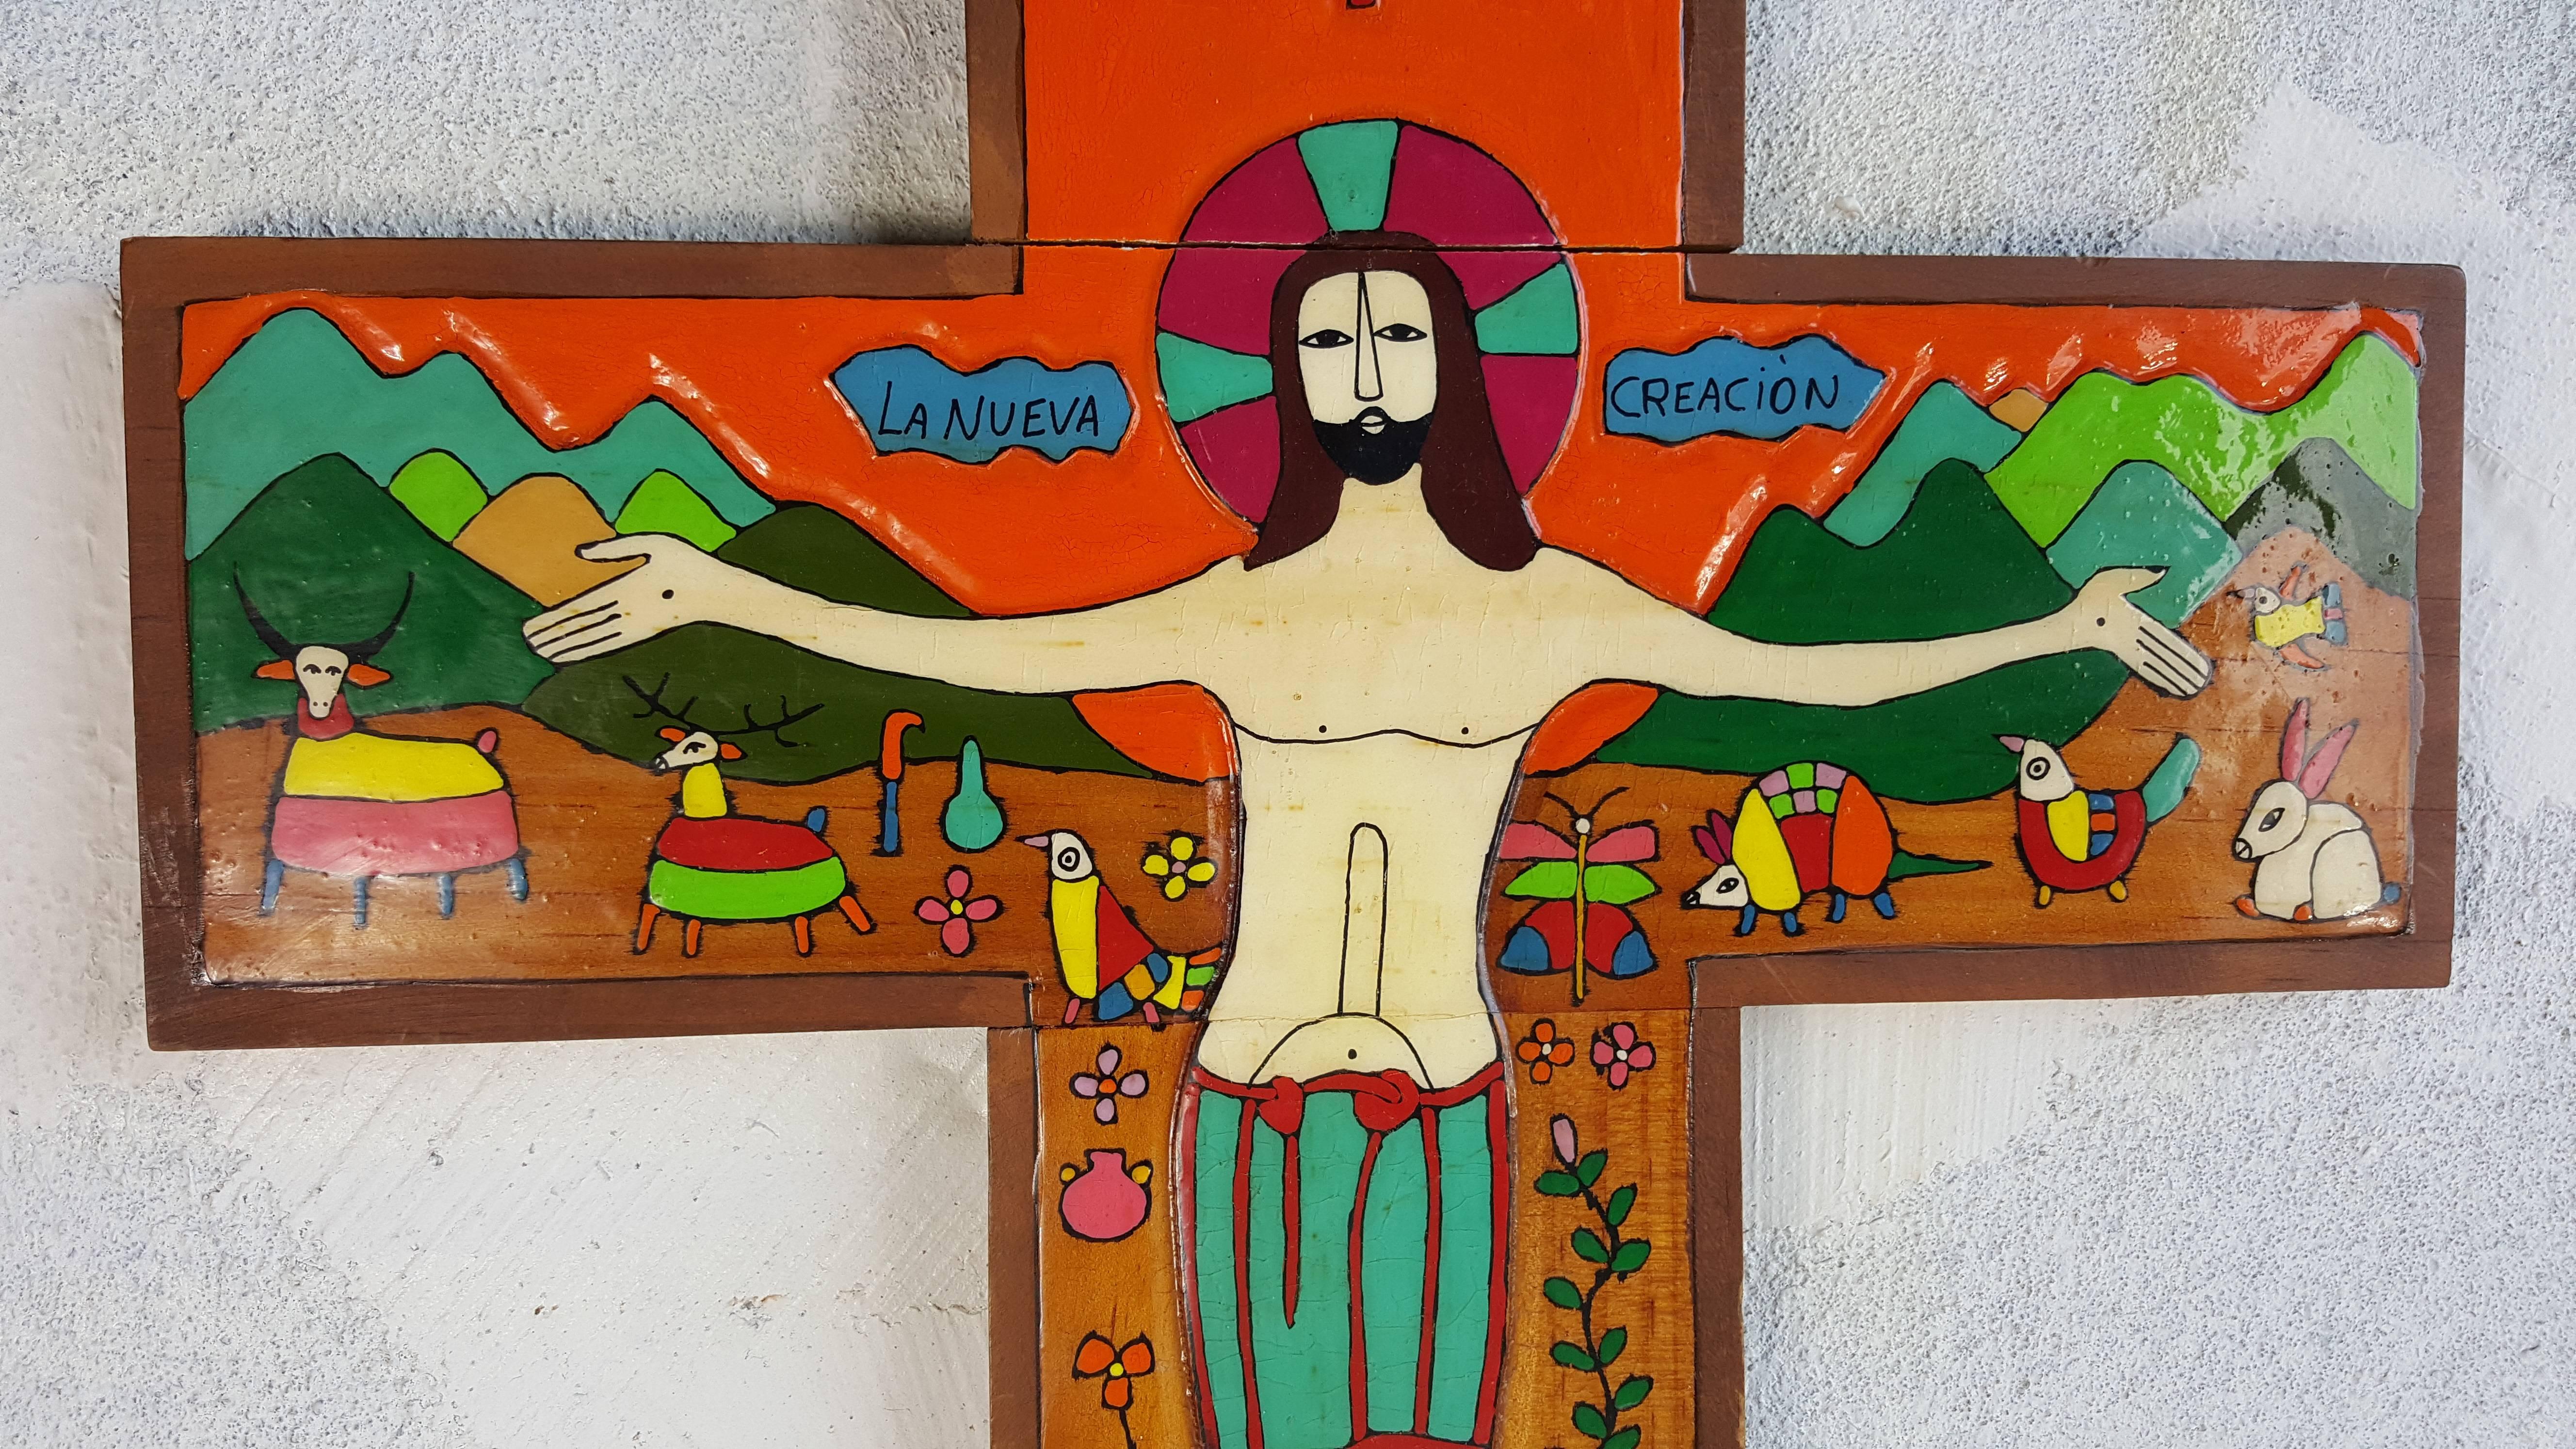 Modernist Folk Art enamel painted crusifix, Spanish, whimsical, playful painted sceans, Jesus, 12 apostles, animals and houses. Quite charming